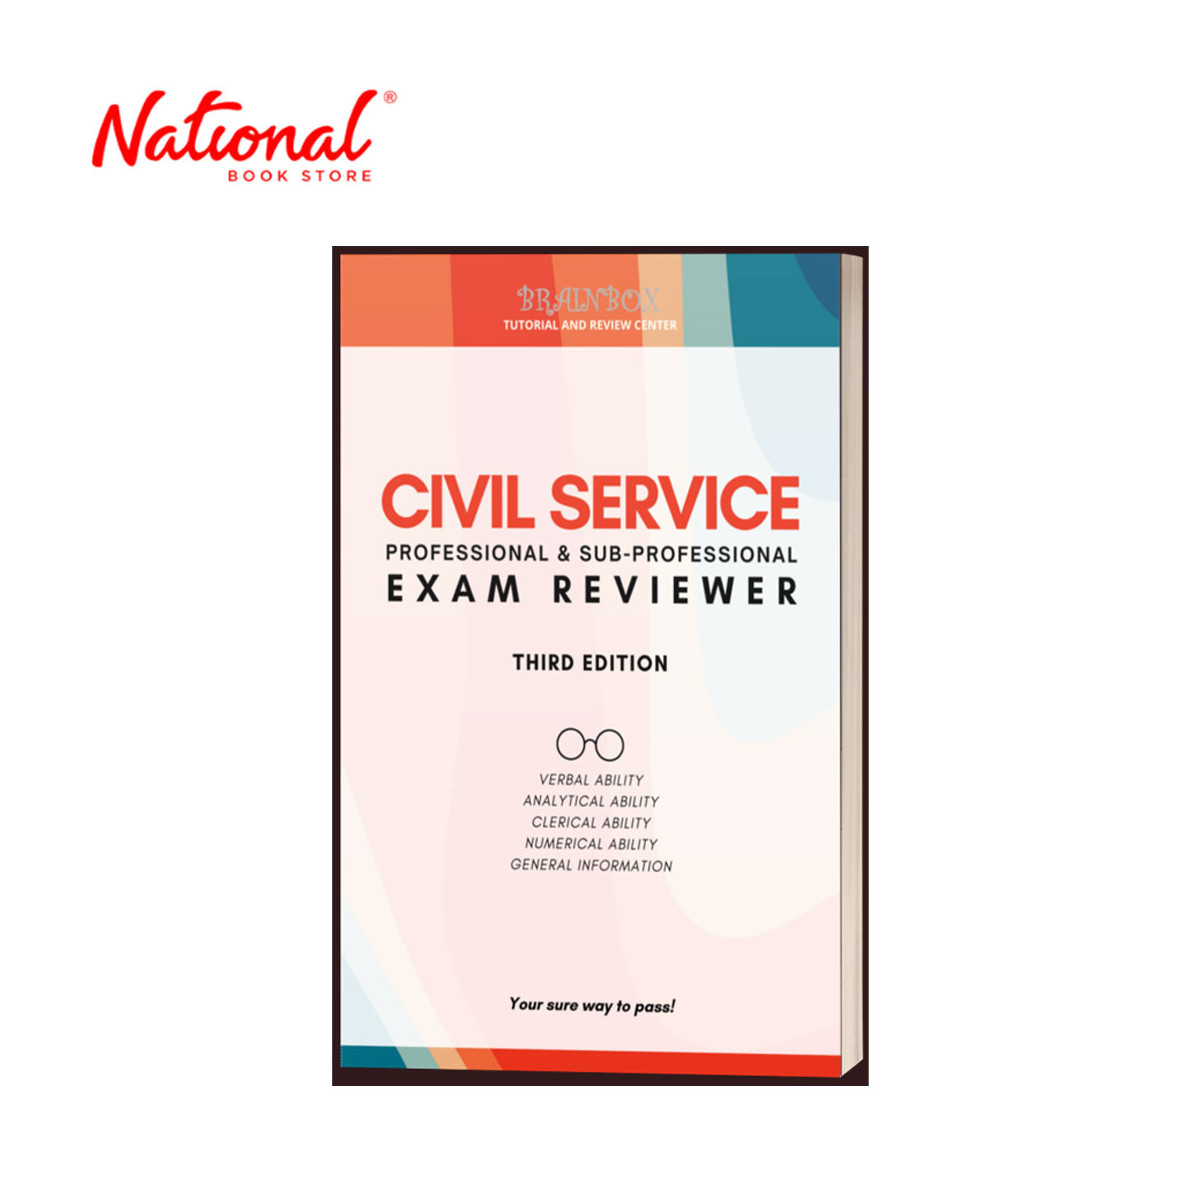 Brainbox Civil Service Reviewer Third Edition by Faye Colas - Trade Paperback - Reference Books